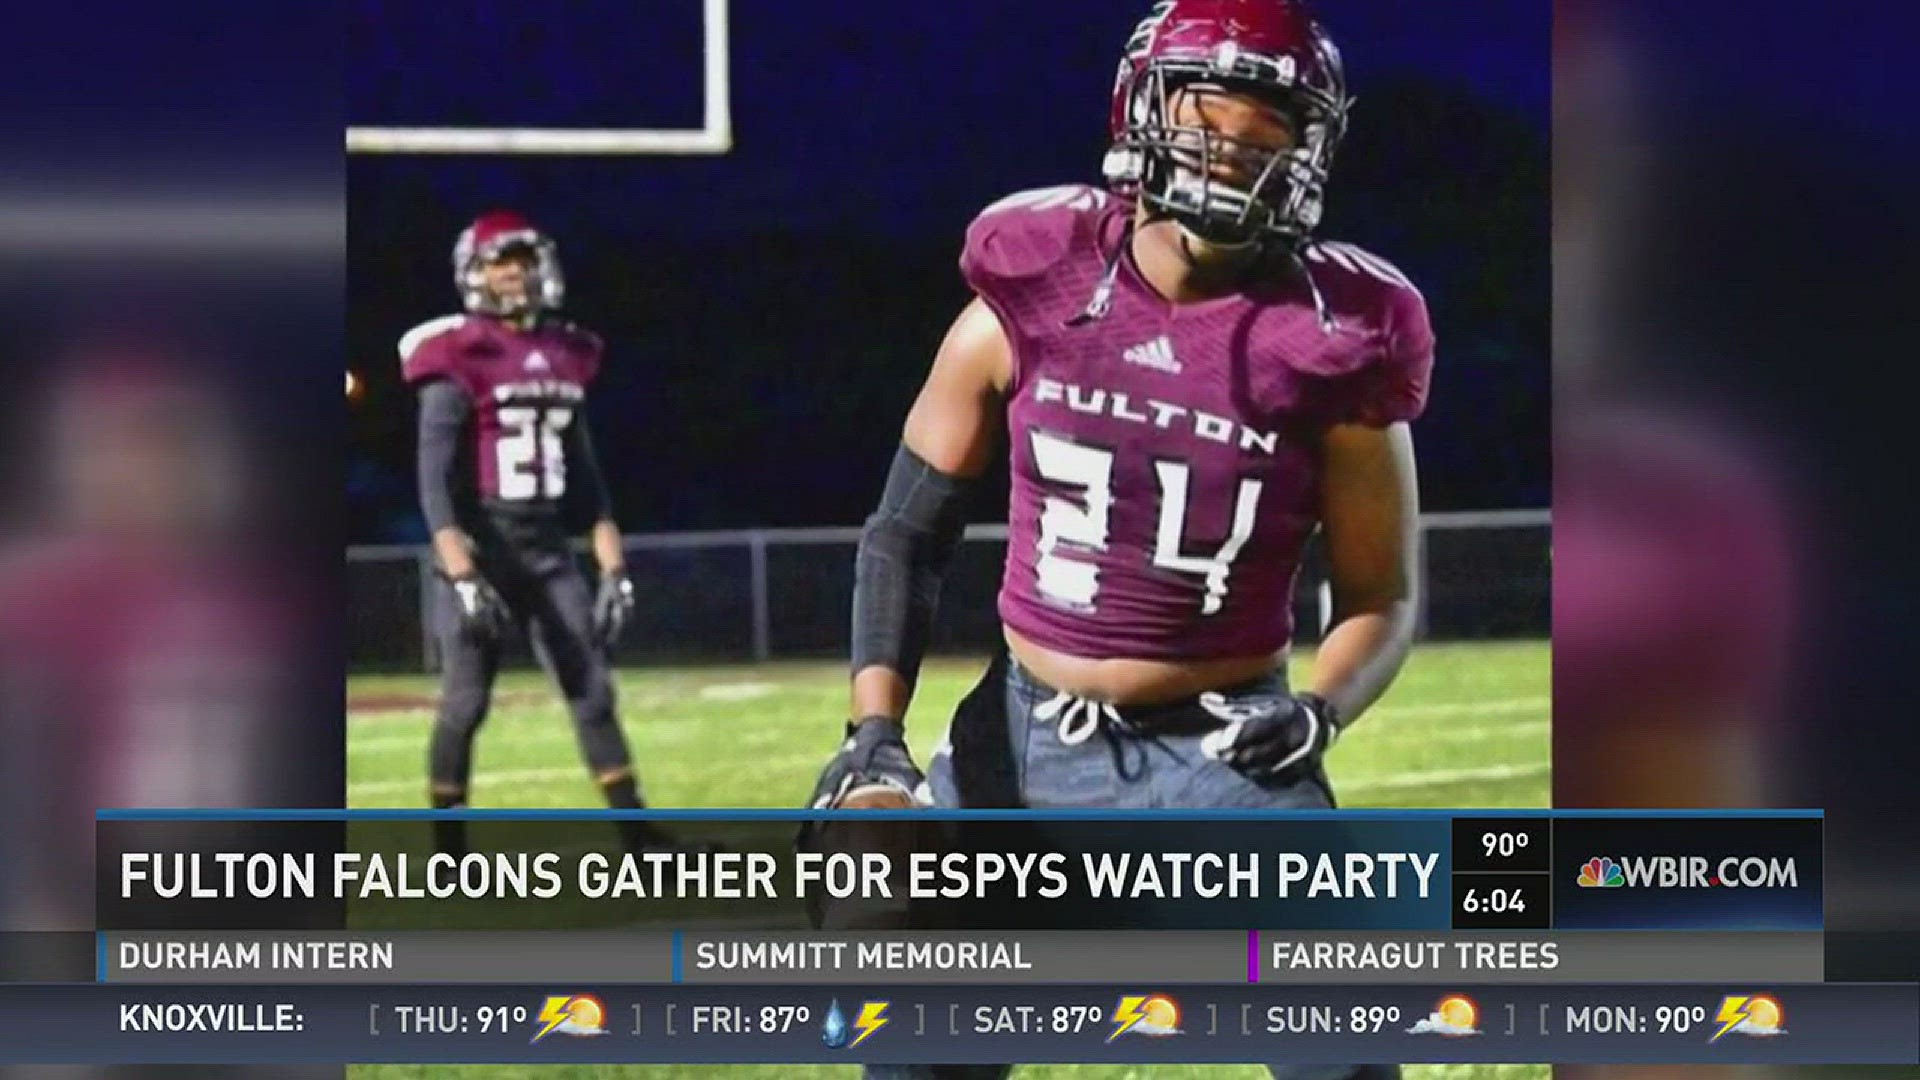 Downtown Regal Riviera will host a watch party for the Fulton football team and the public to honor Zaevion Dobson.